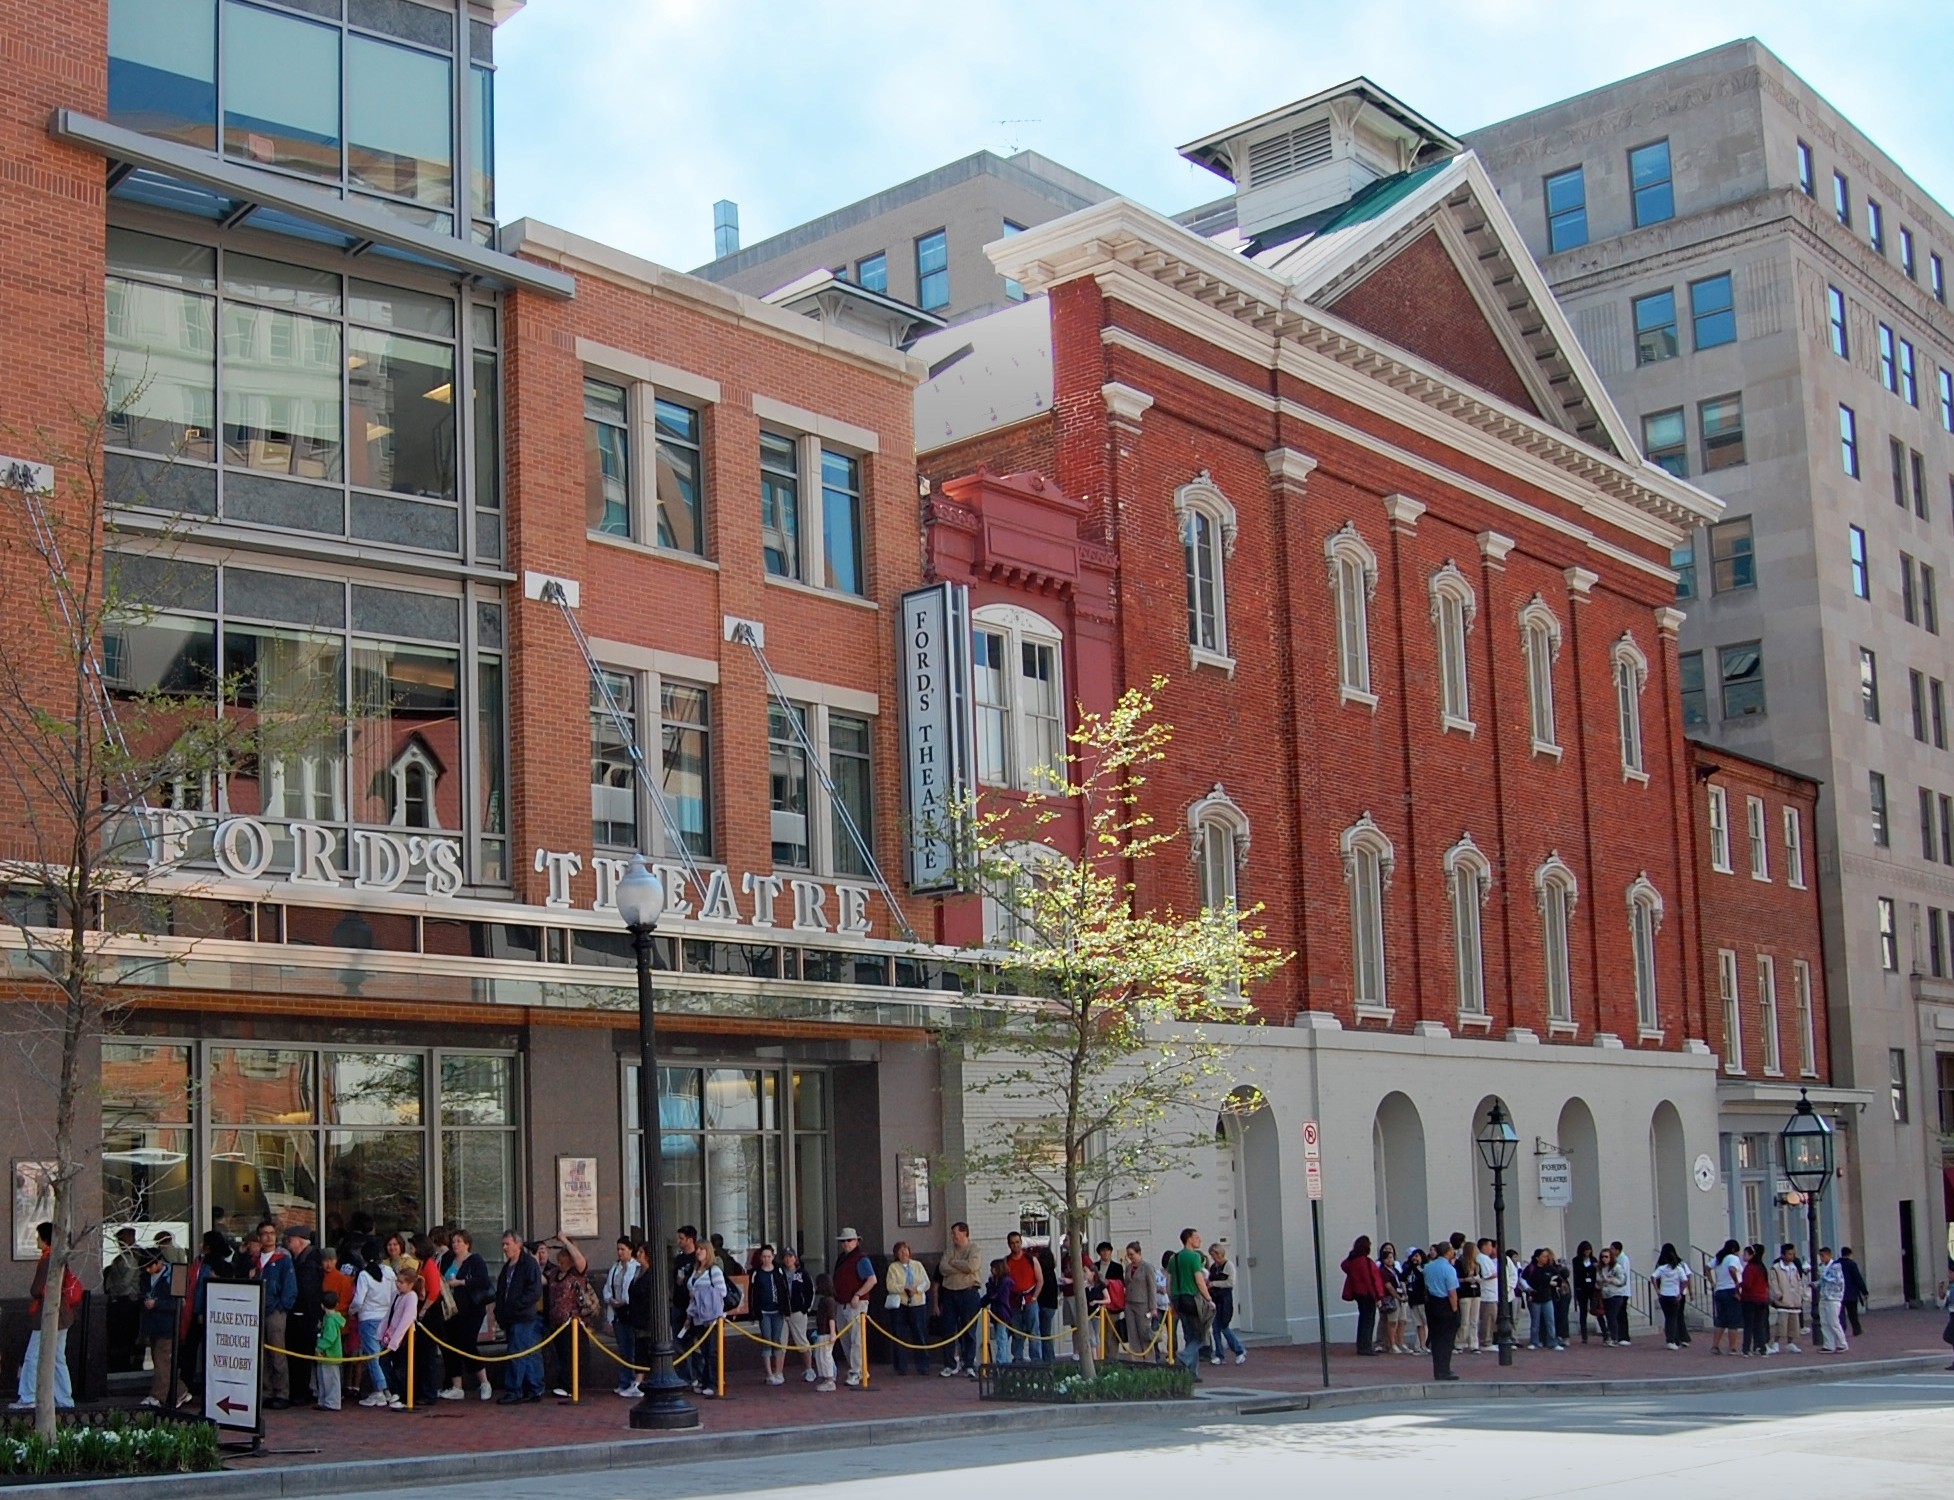 Exterior image of Ford's Theatre today. Image shows a line of visitors stretching down Tenth Street NW. 